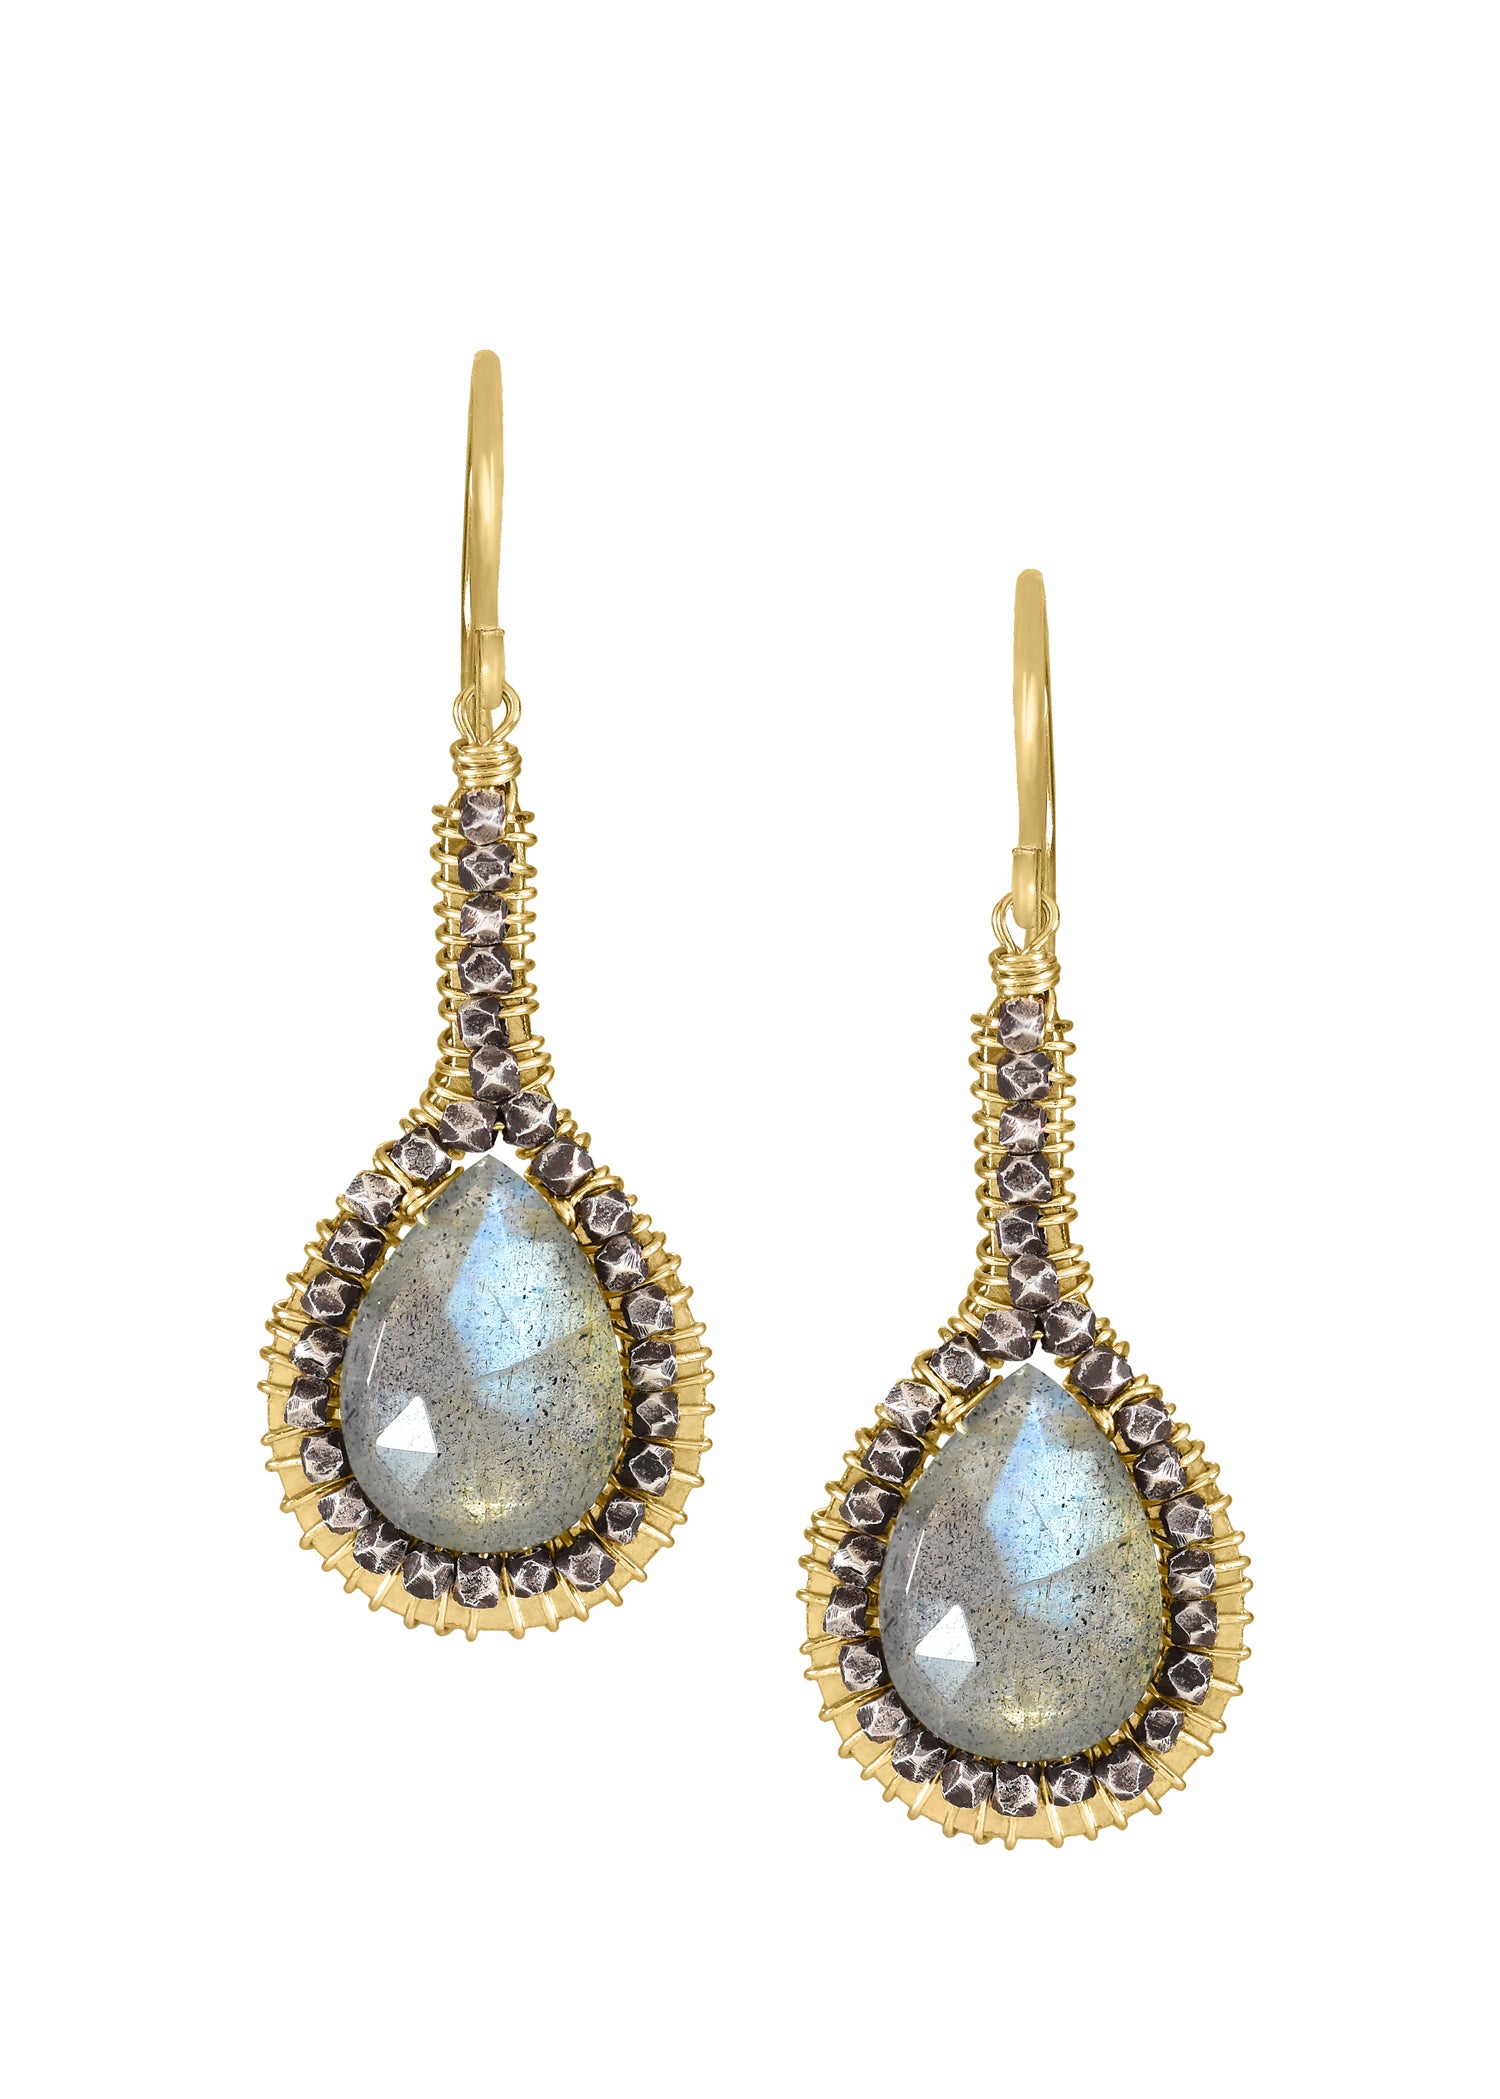 Labradorite Sterling silver 14k gold fill Mixed metal Earrings measure 1-1/2" in length (including the ear wires) and 7/16" in width at the widest point Handmade in our Los Angeles studio